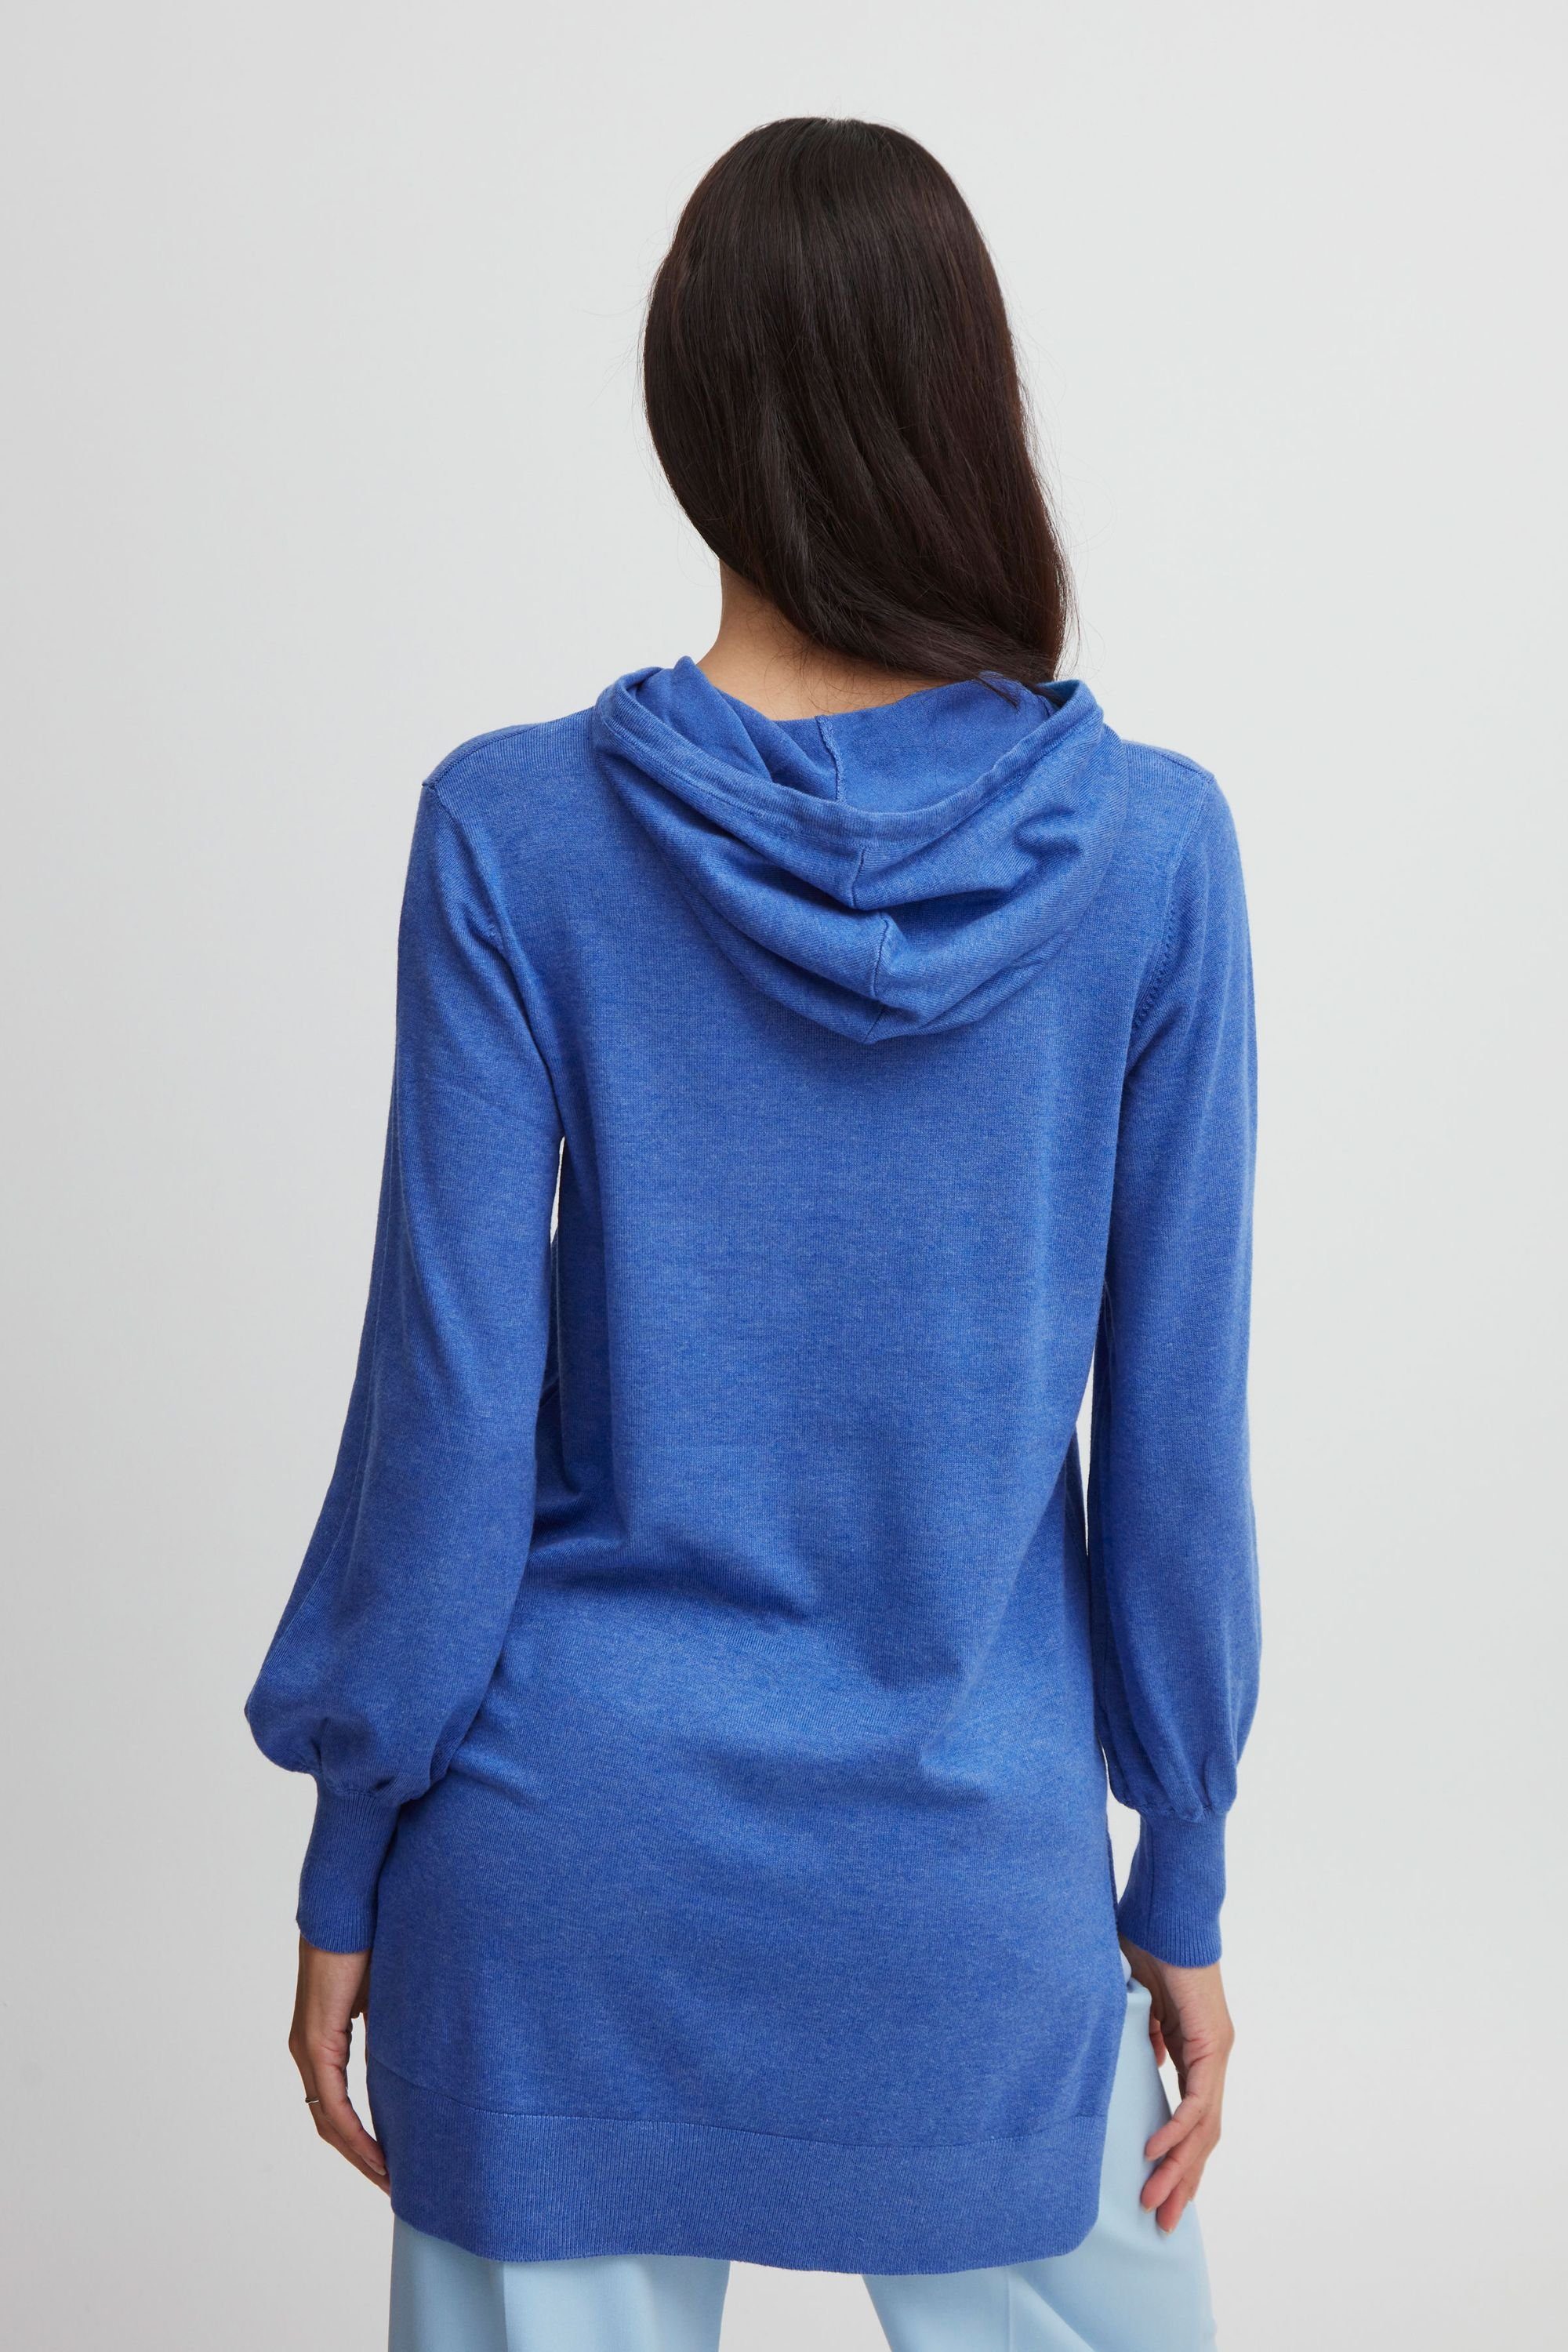 BYMMPIMBAH Longpullover - Blue b.young 20811923 HOODIE (1840511) Strong Melange